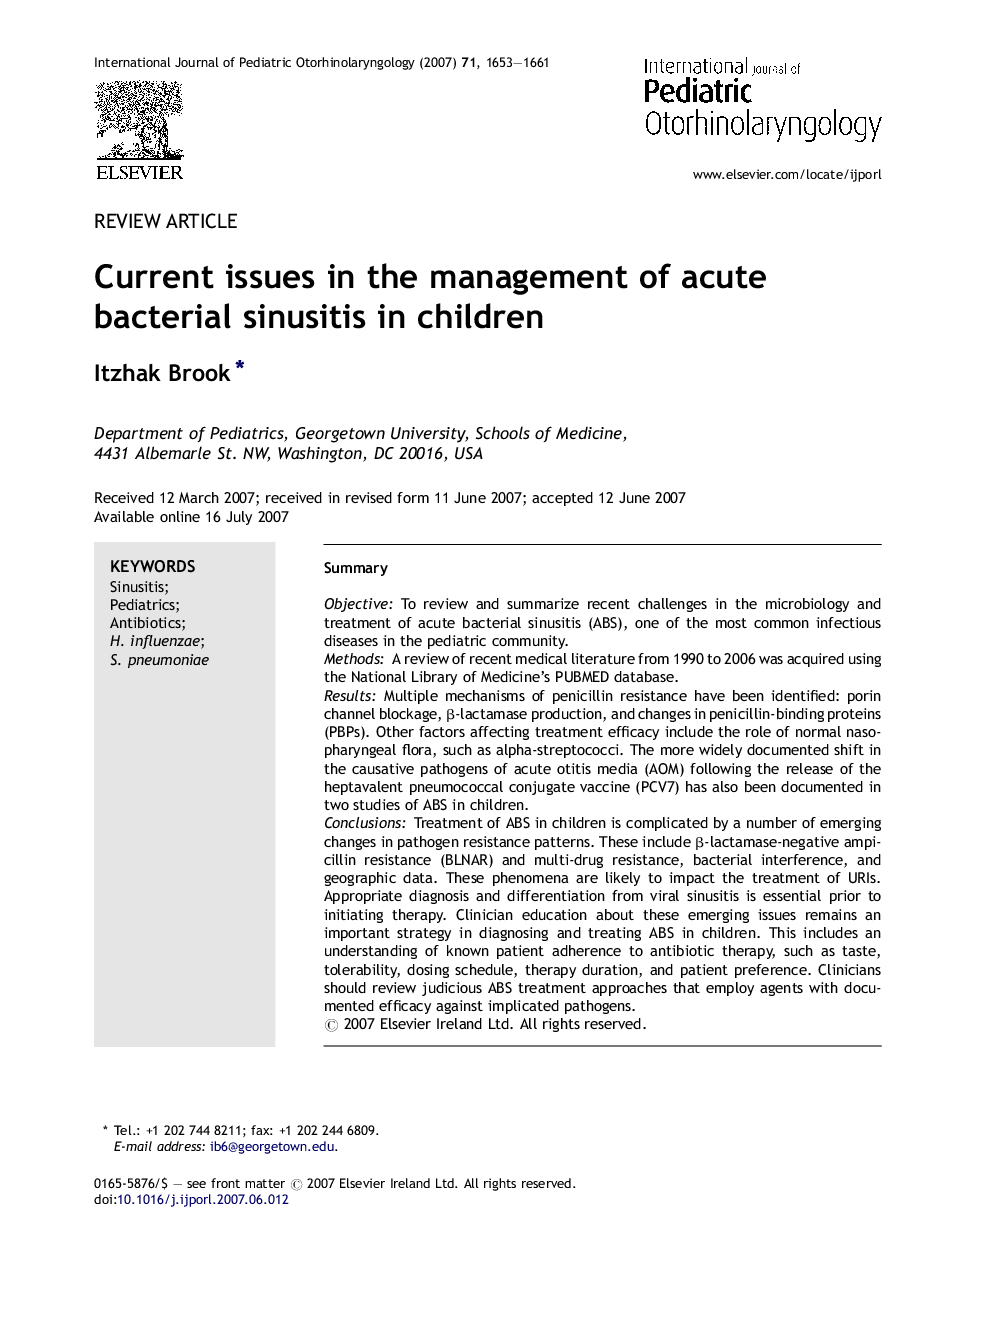 Current issues in the management of acute bacterial sinusitis in children